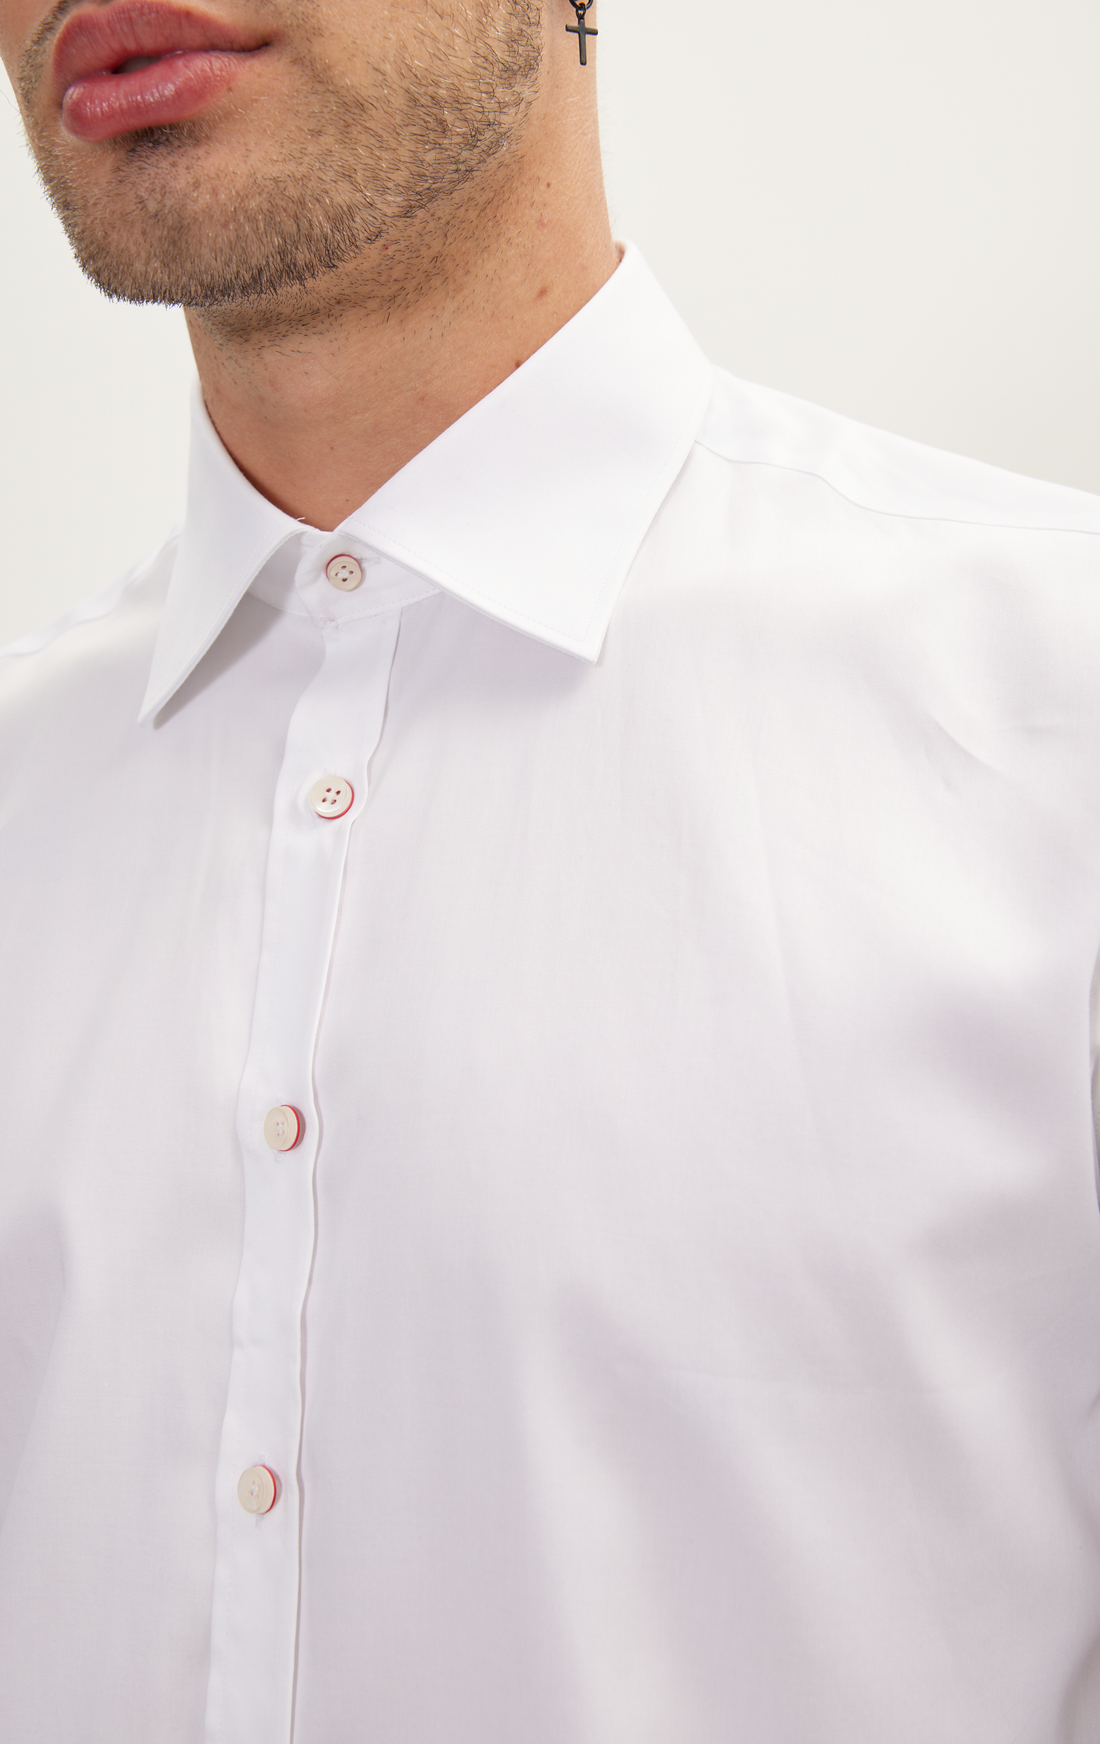 N° 4679 PURE COTTON CONTRAST BUTTON DRESS SHIRT - WHITE RED ACCENTS